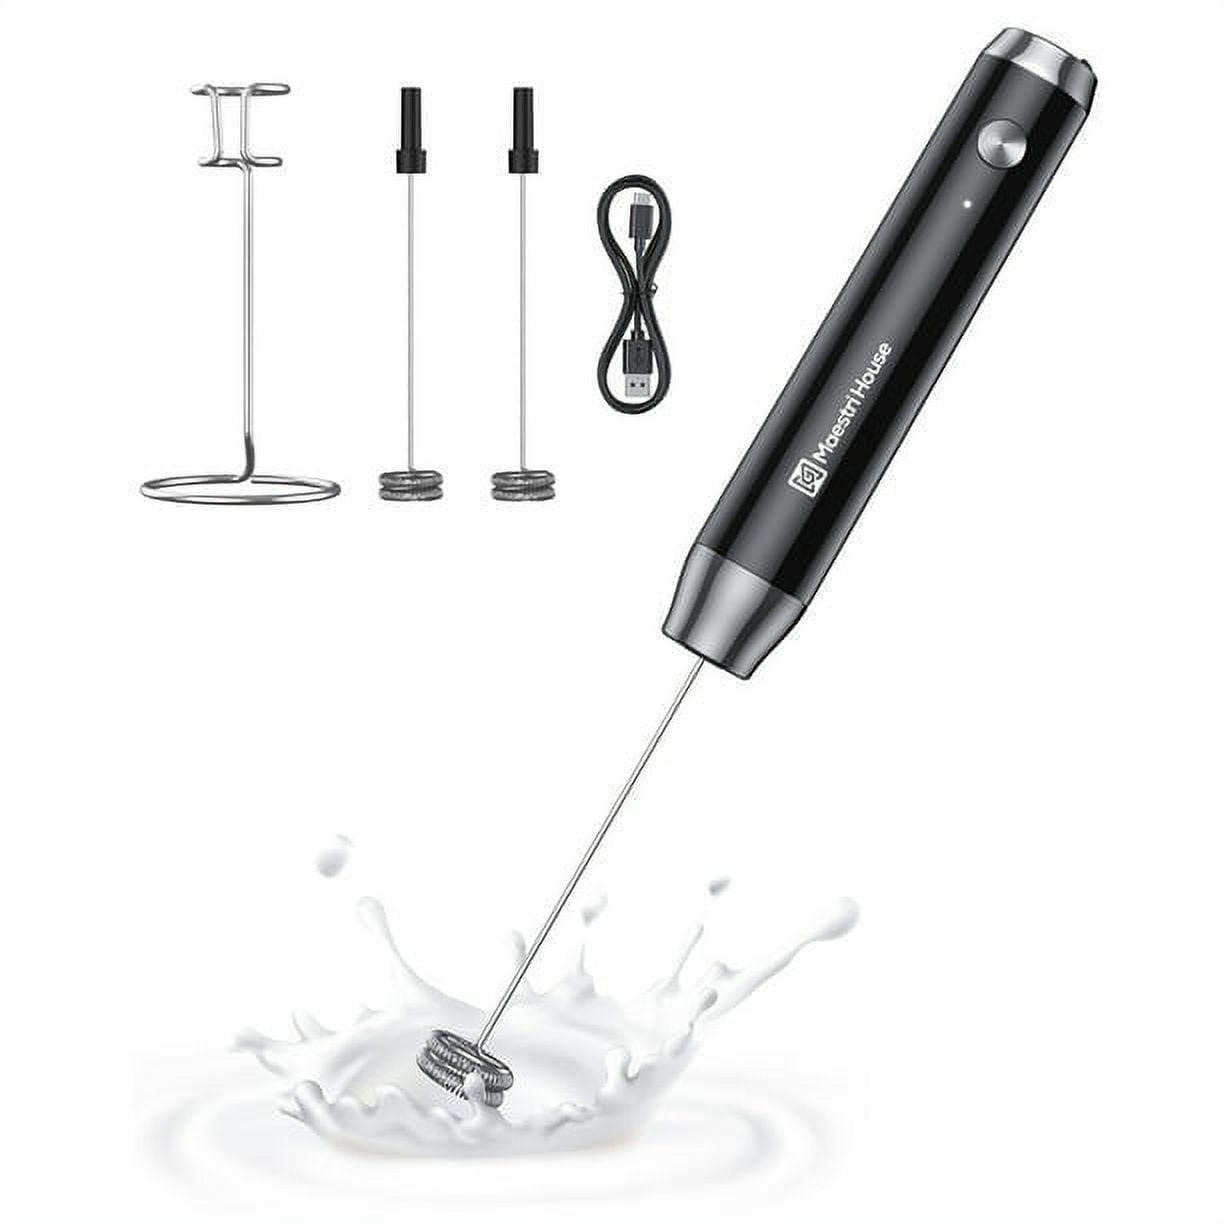 Electric Milk Frother Handheld, Maestri House USB Rechargeable Milk Foam  Maker with 1 Whisks, IPX7 Waterproof, Black